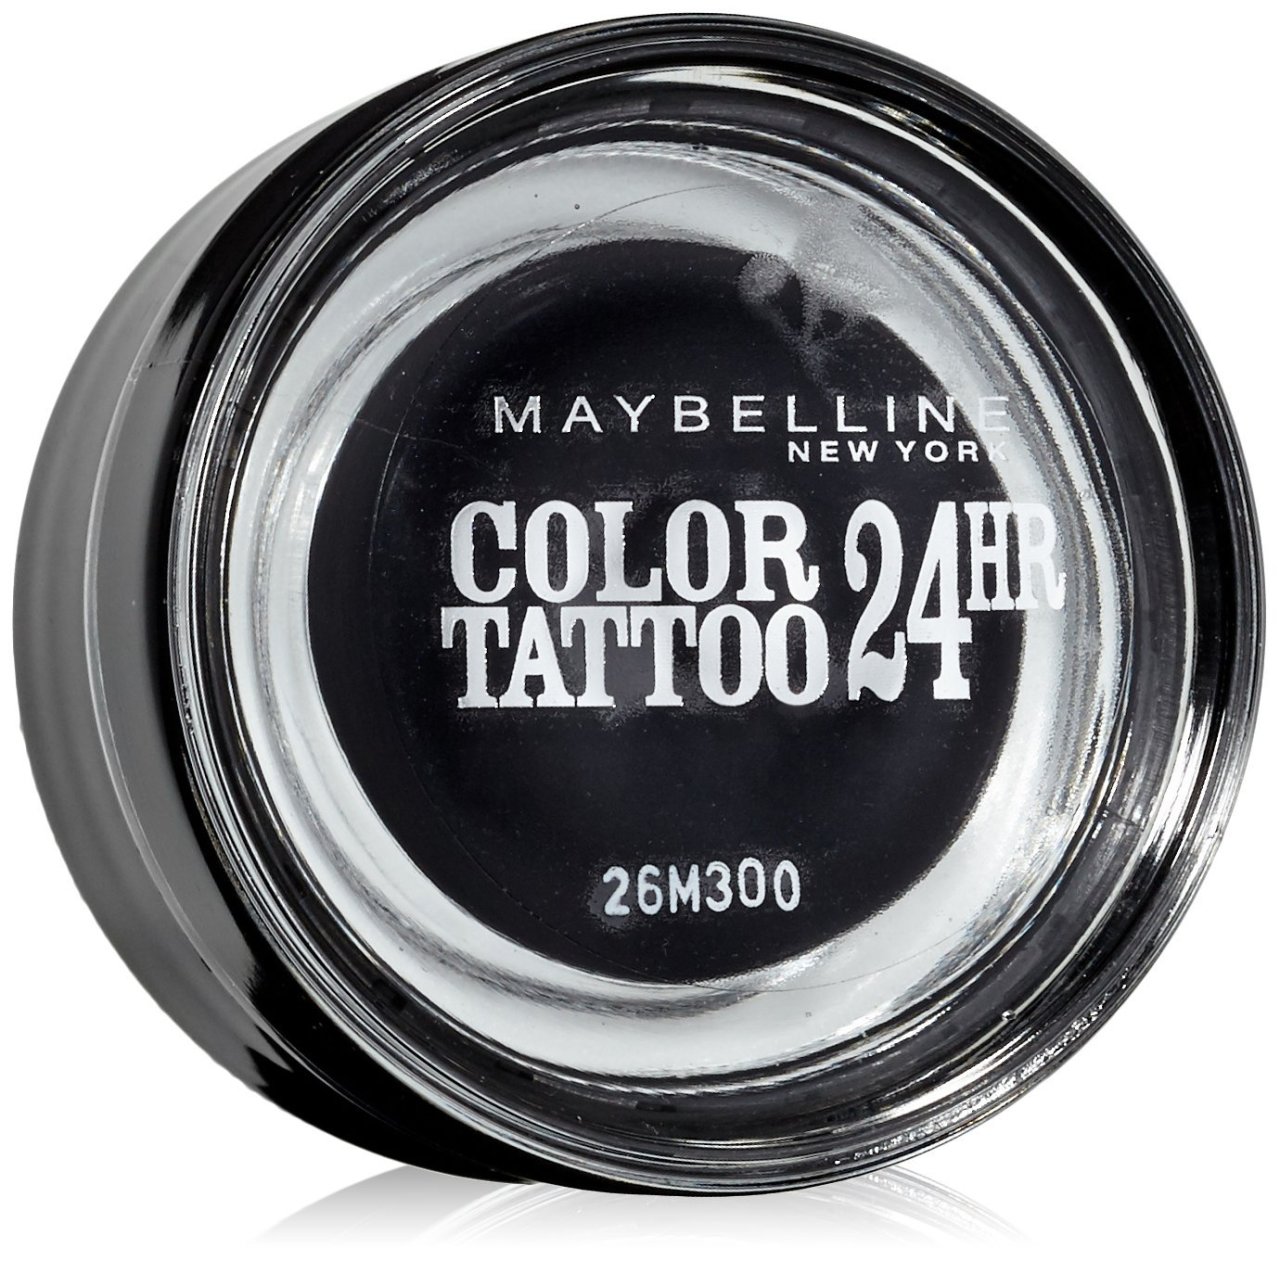 Maybelline New York Color Tattoo 24 60